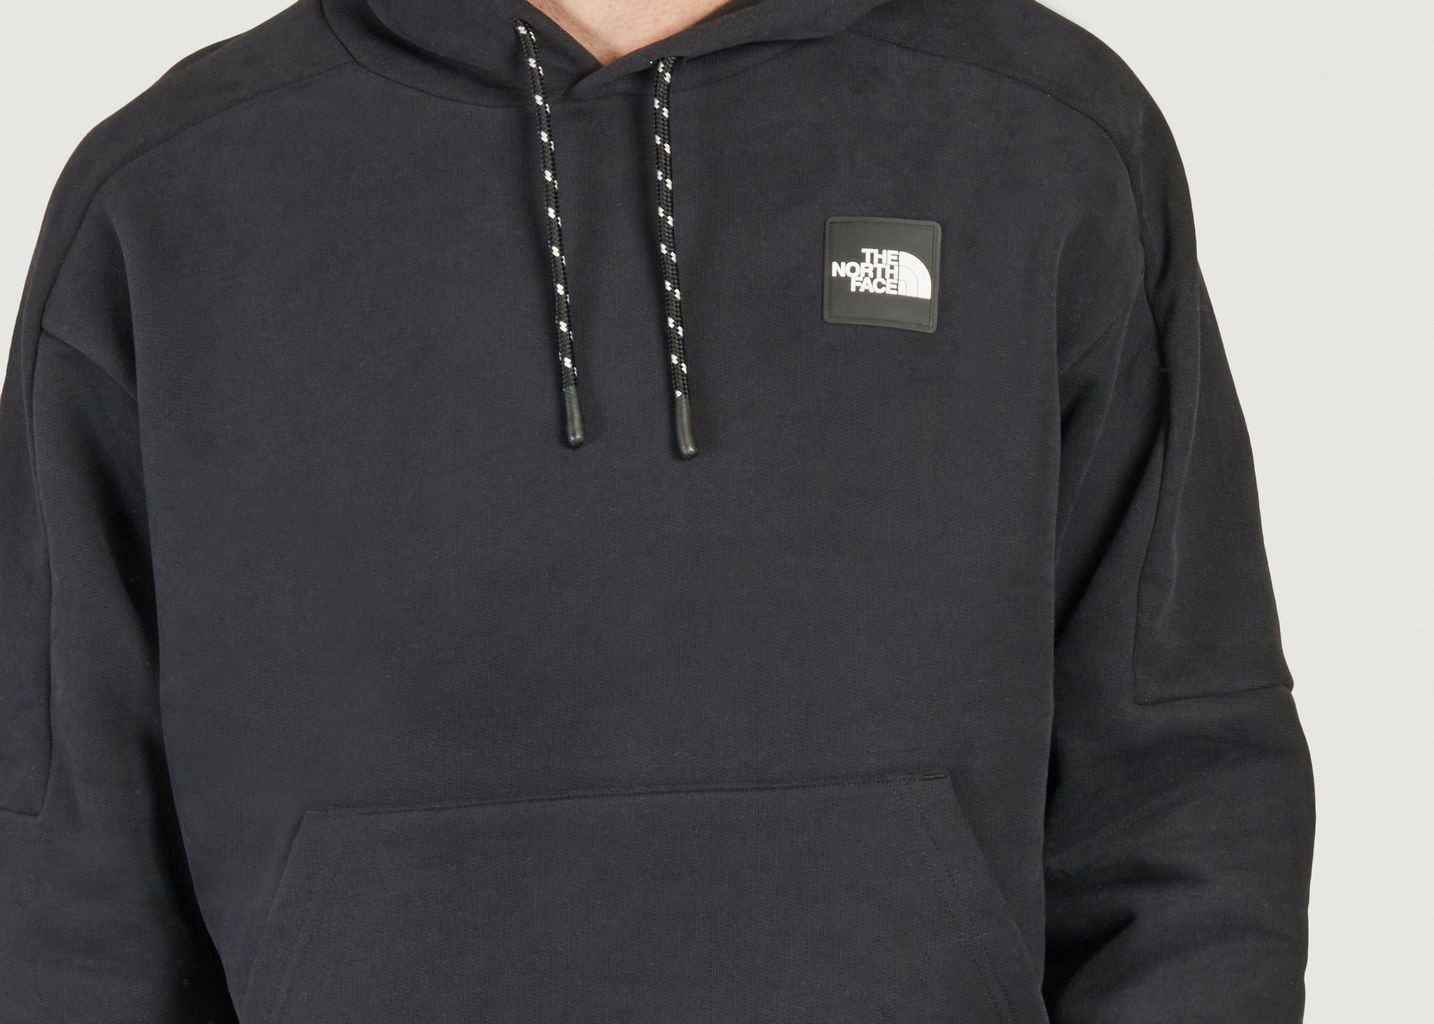 Hoodie The 489 - The North Face